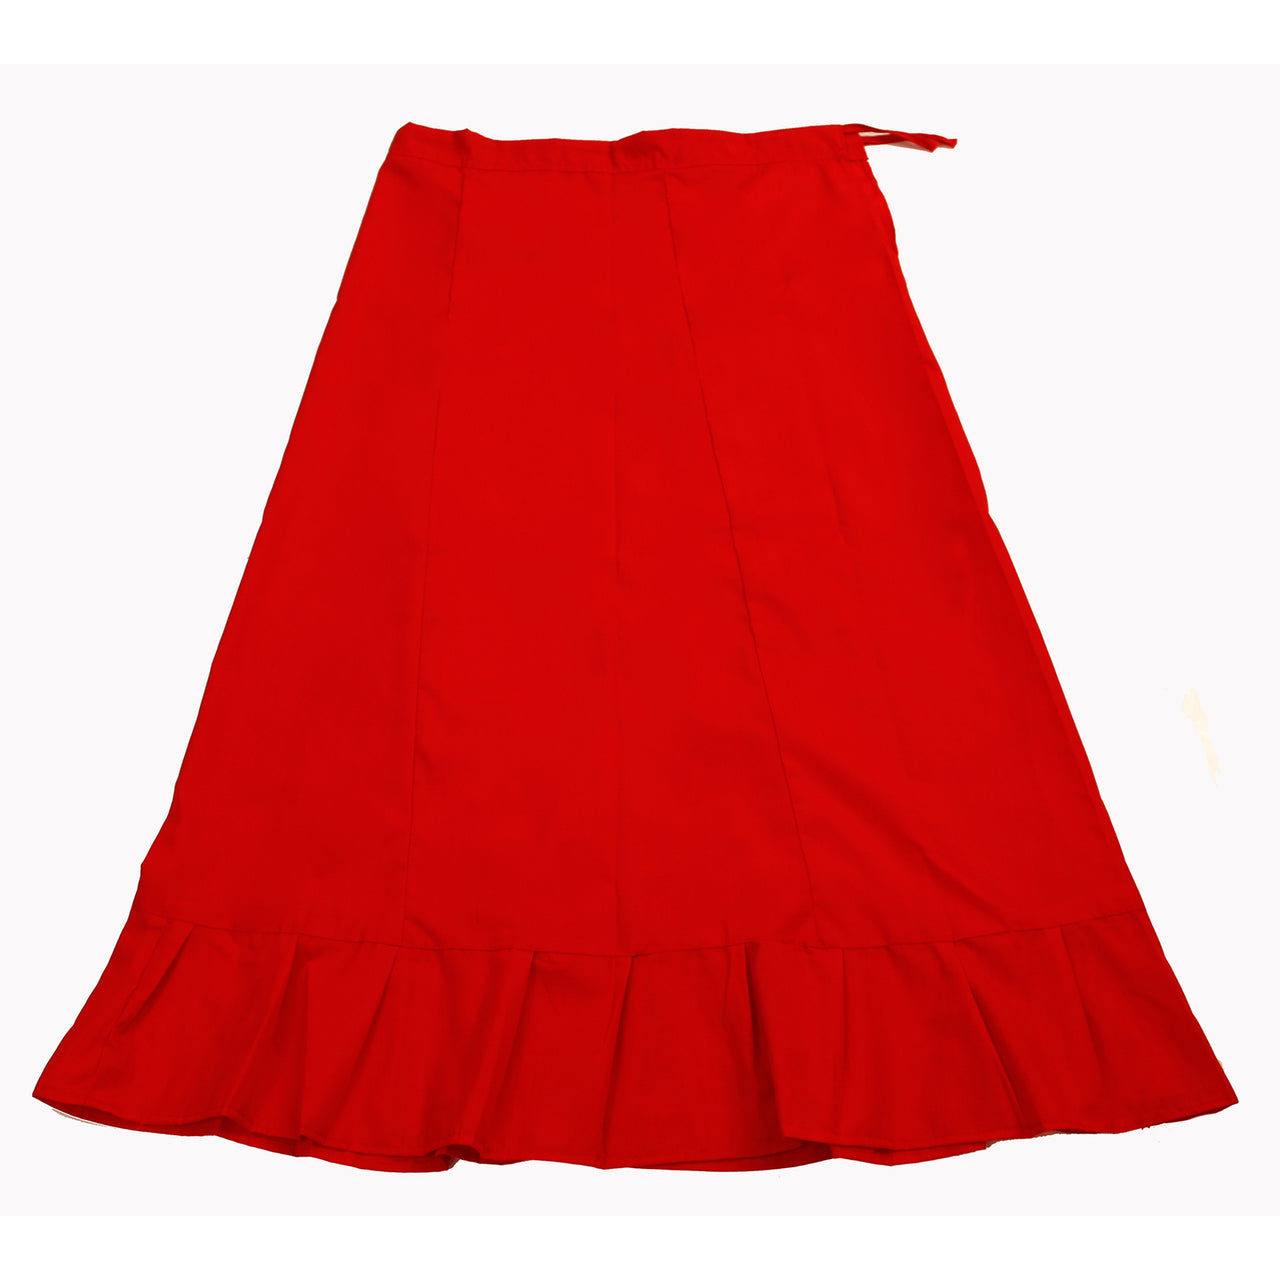 Red - Sari (Saree) Petticoat - Available in S, M, L & XL - Underskirts For Sari's